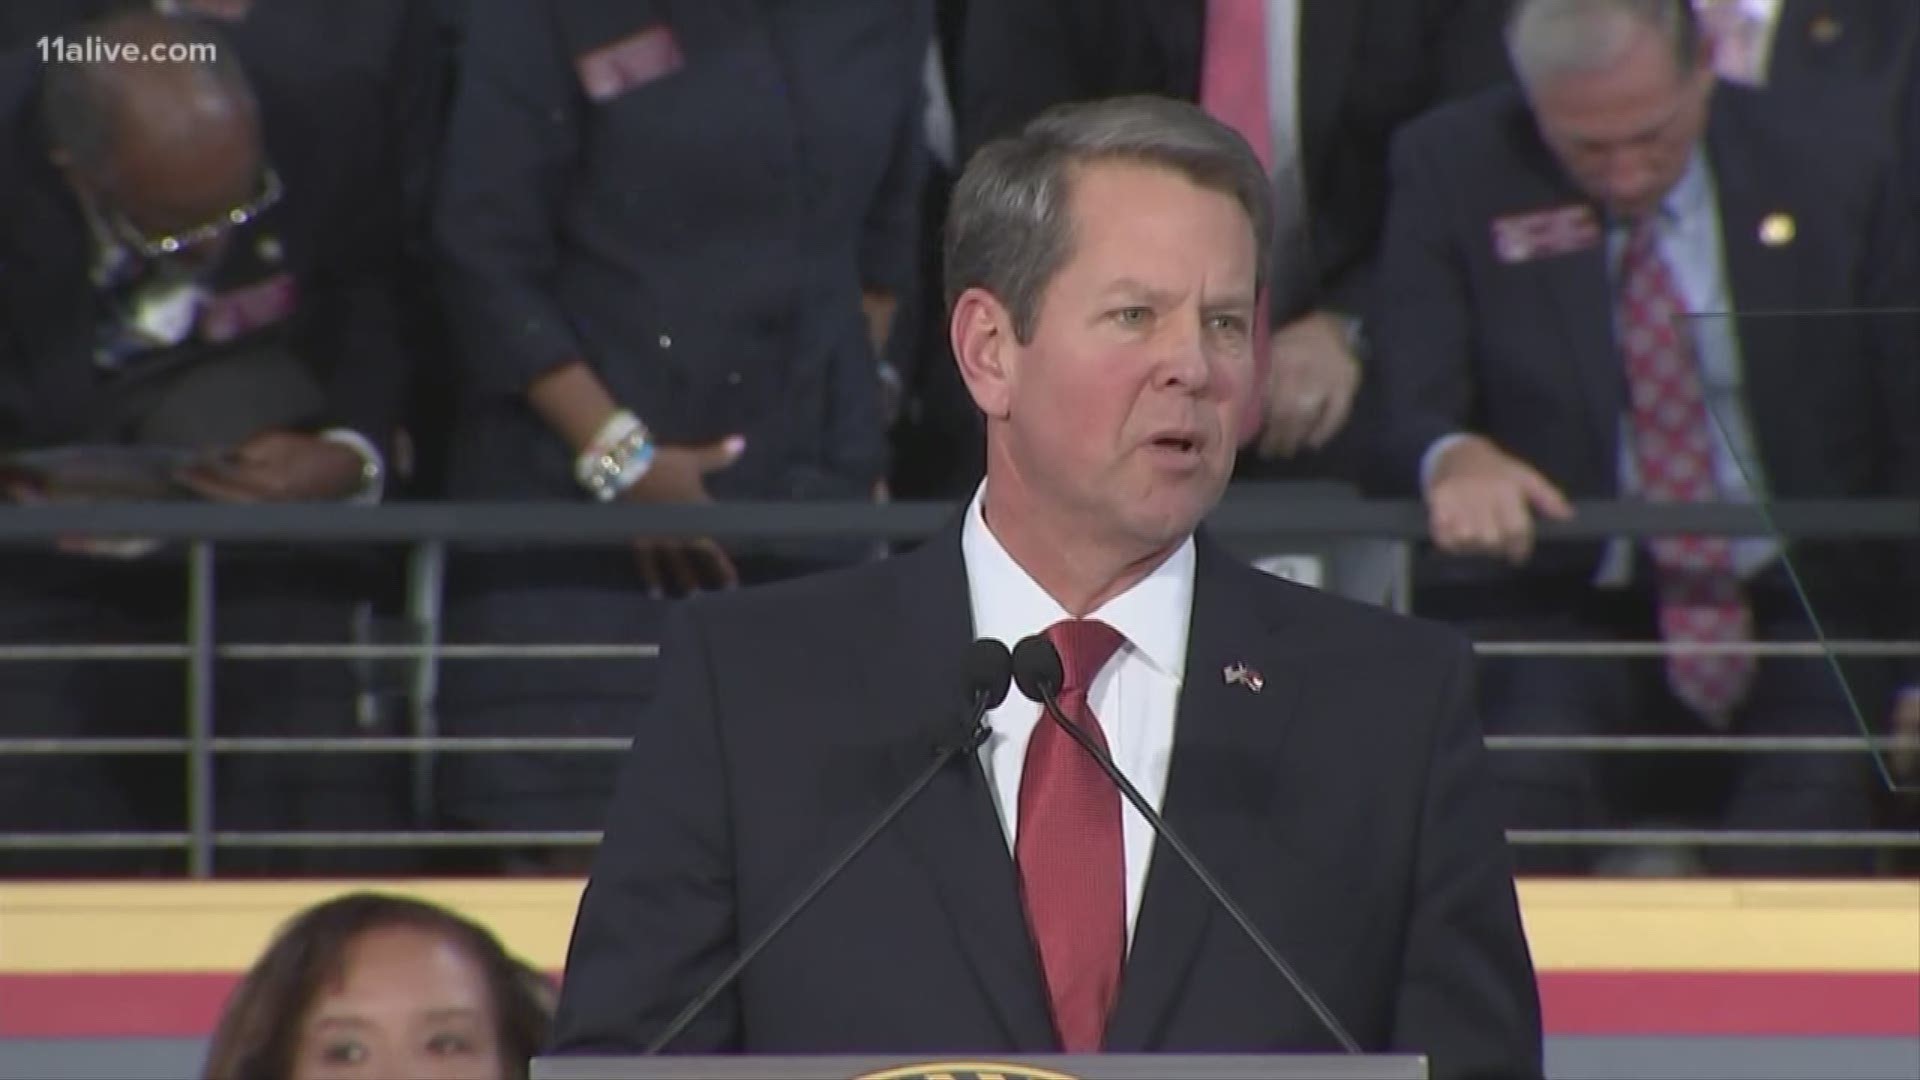 In his inauguration speech, Governor Brian Kemp outlined his plans to build up rural Georgia and the economy, his promise to support teachers and crack down on drugs.